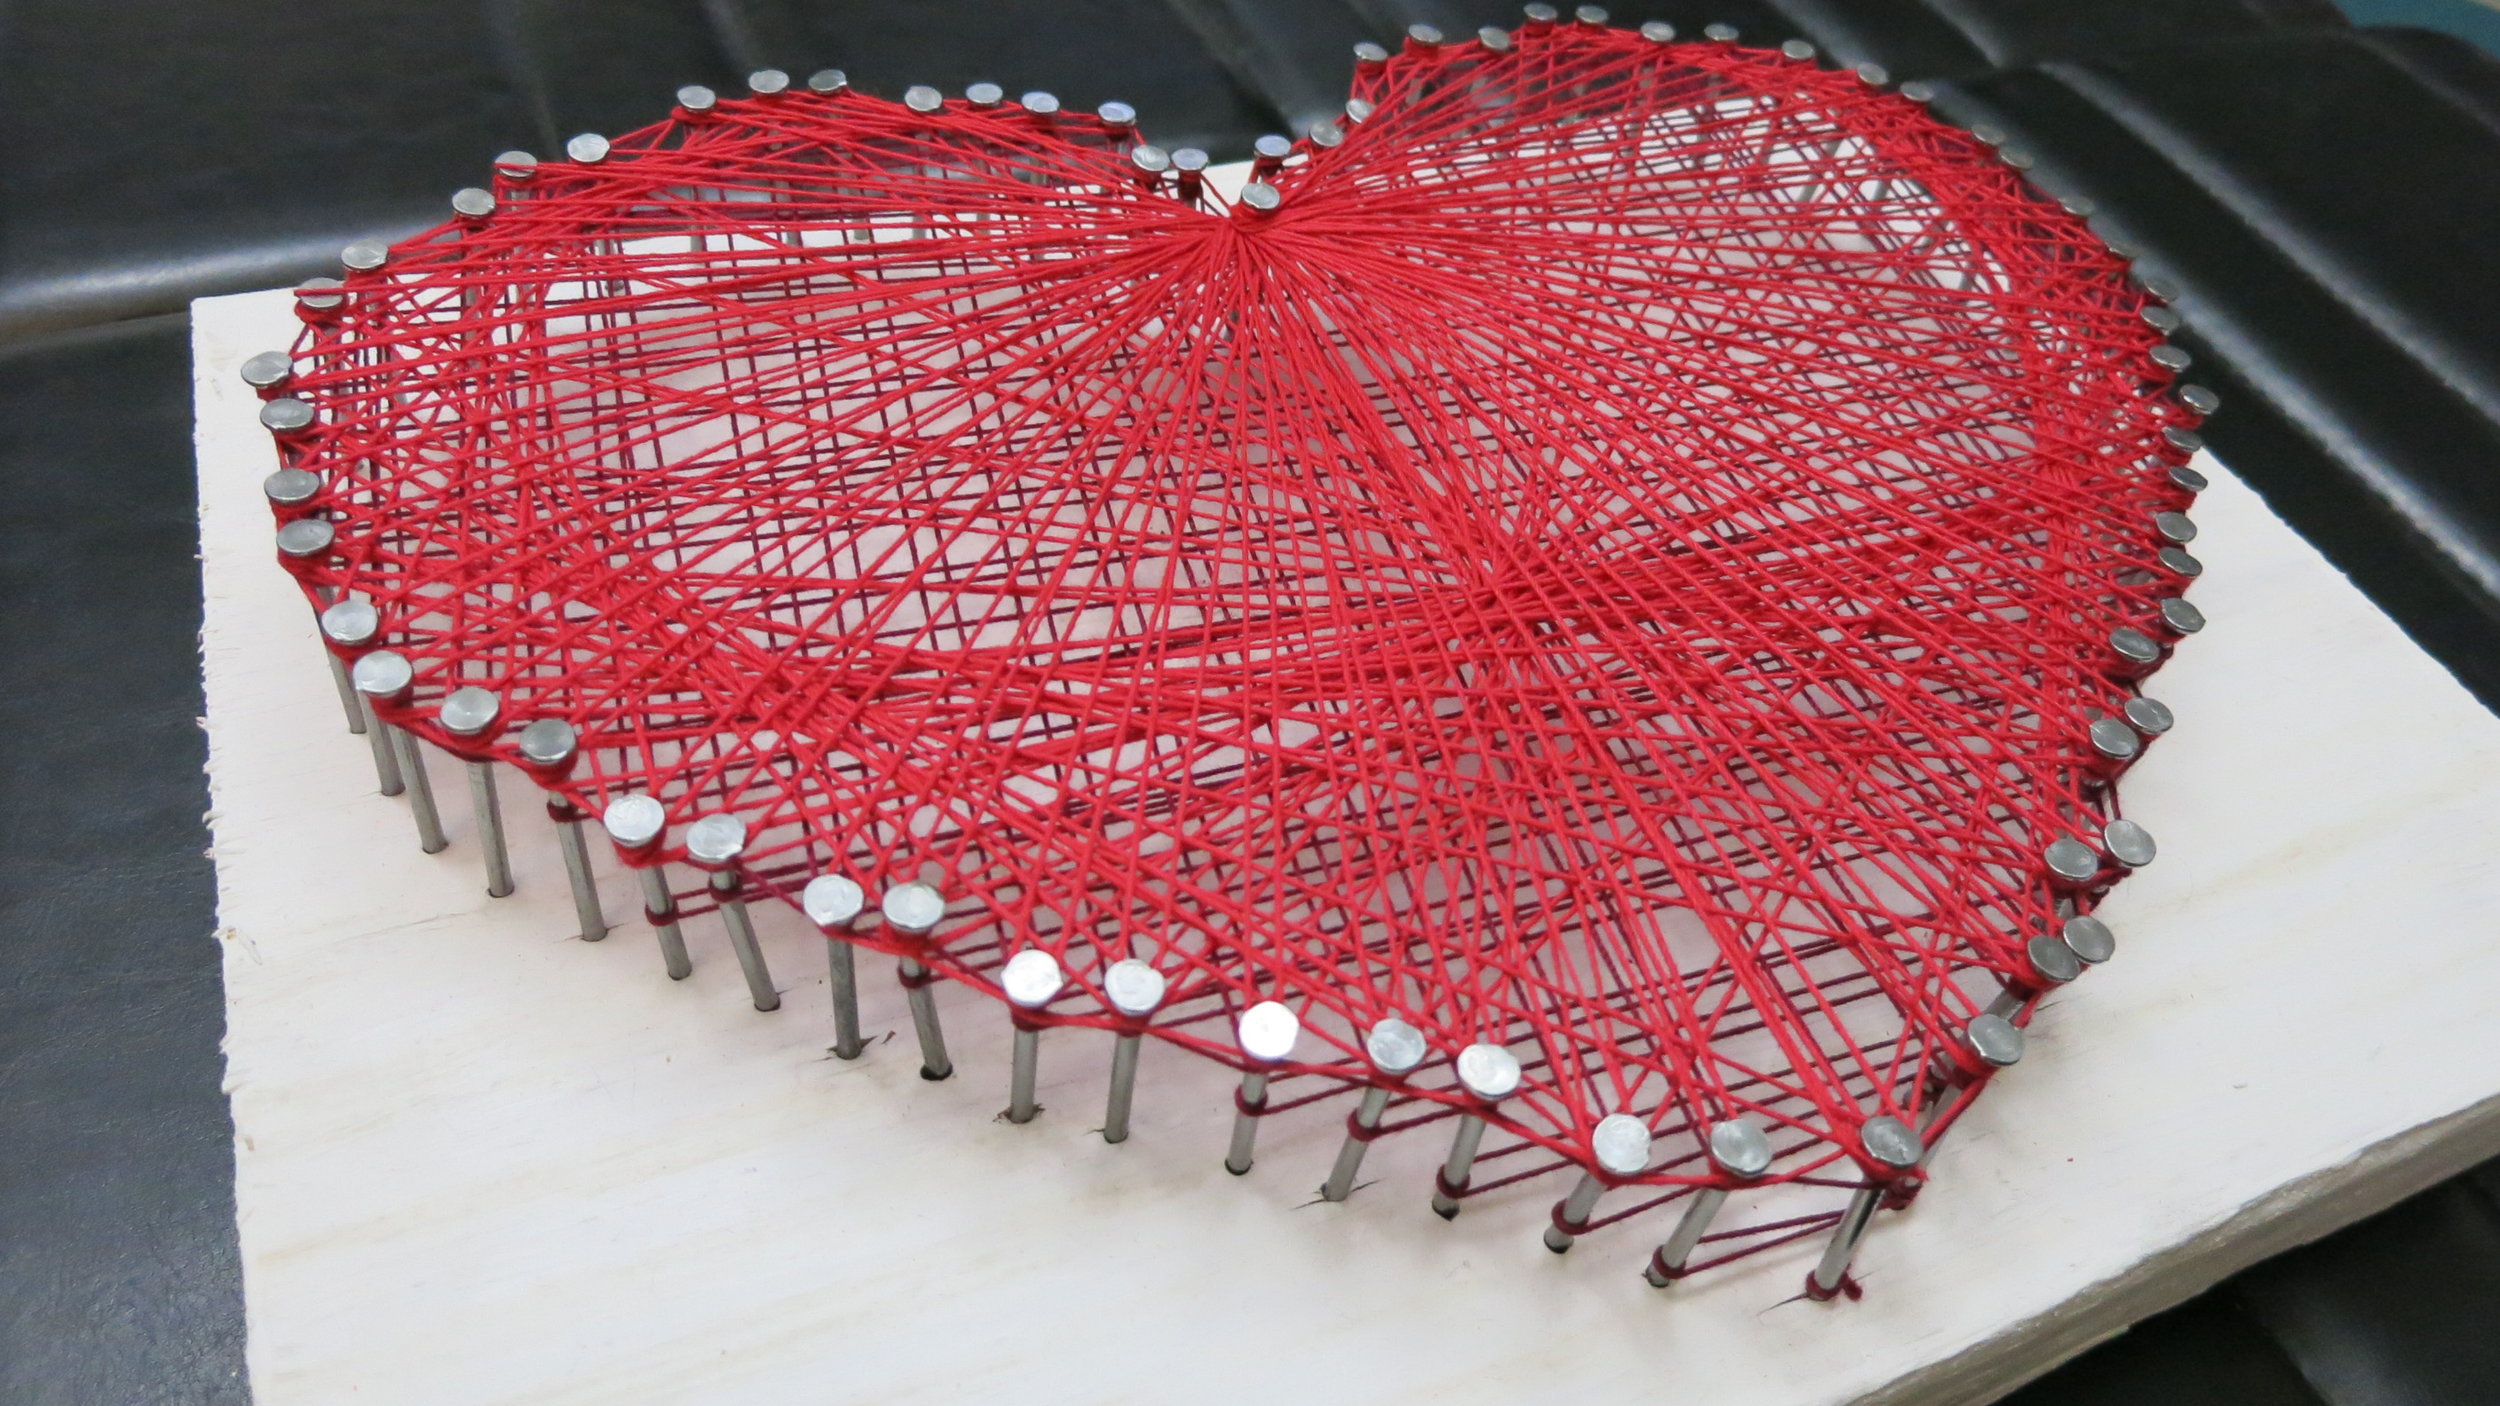 STRING ART ORNAMENTS — Hearts for the Arts